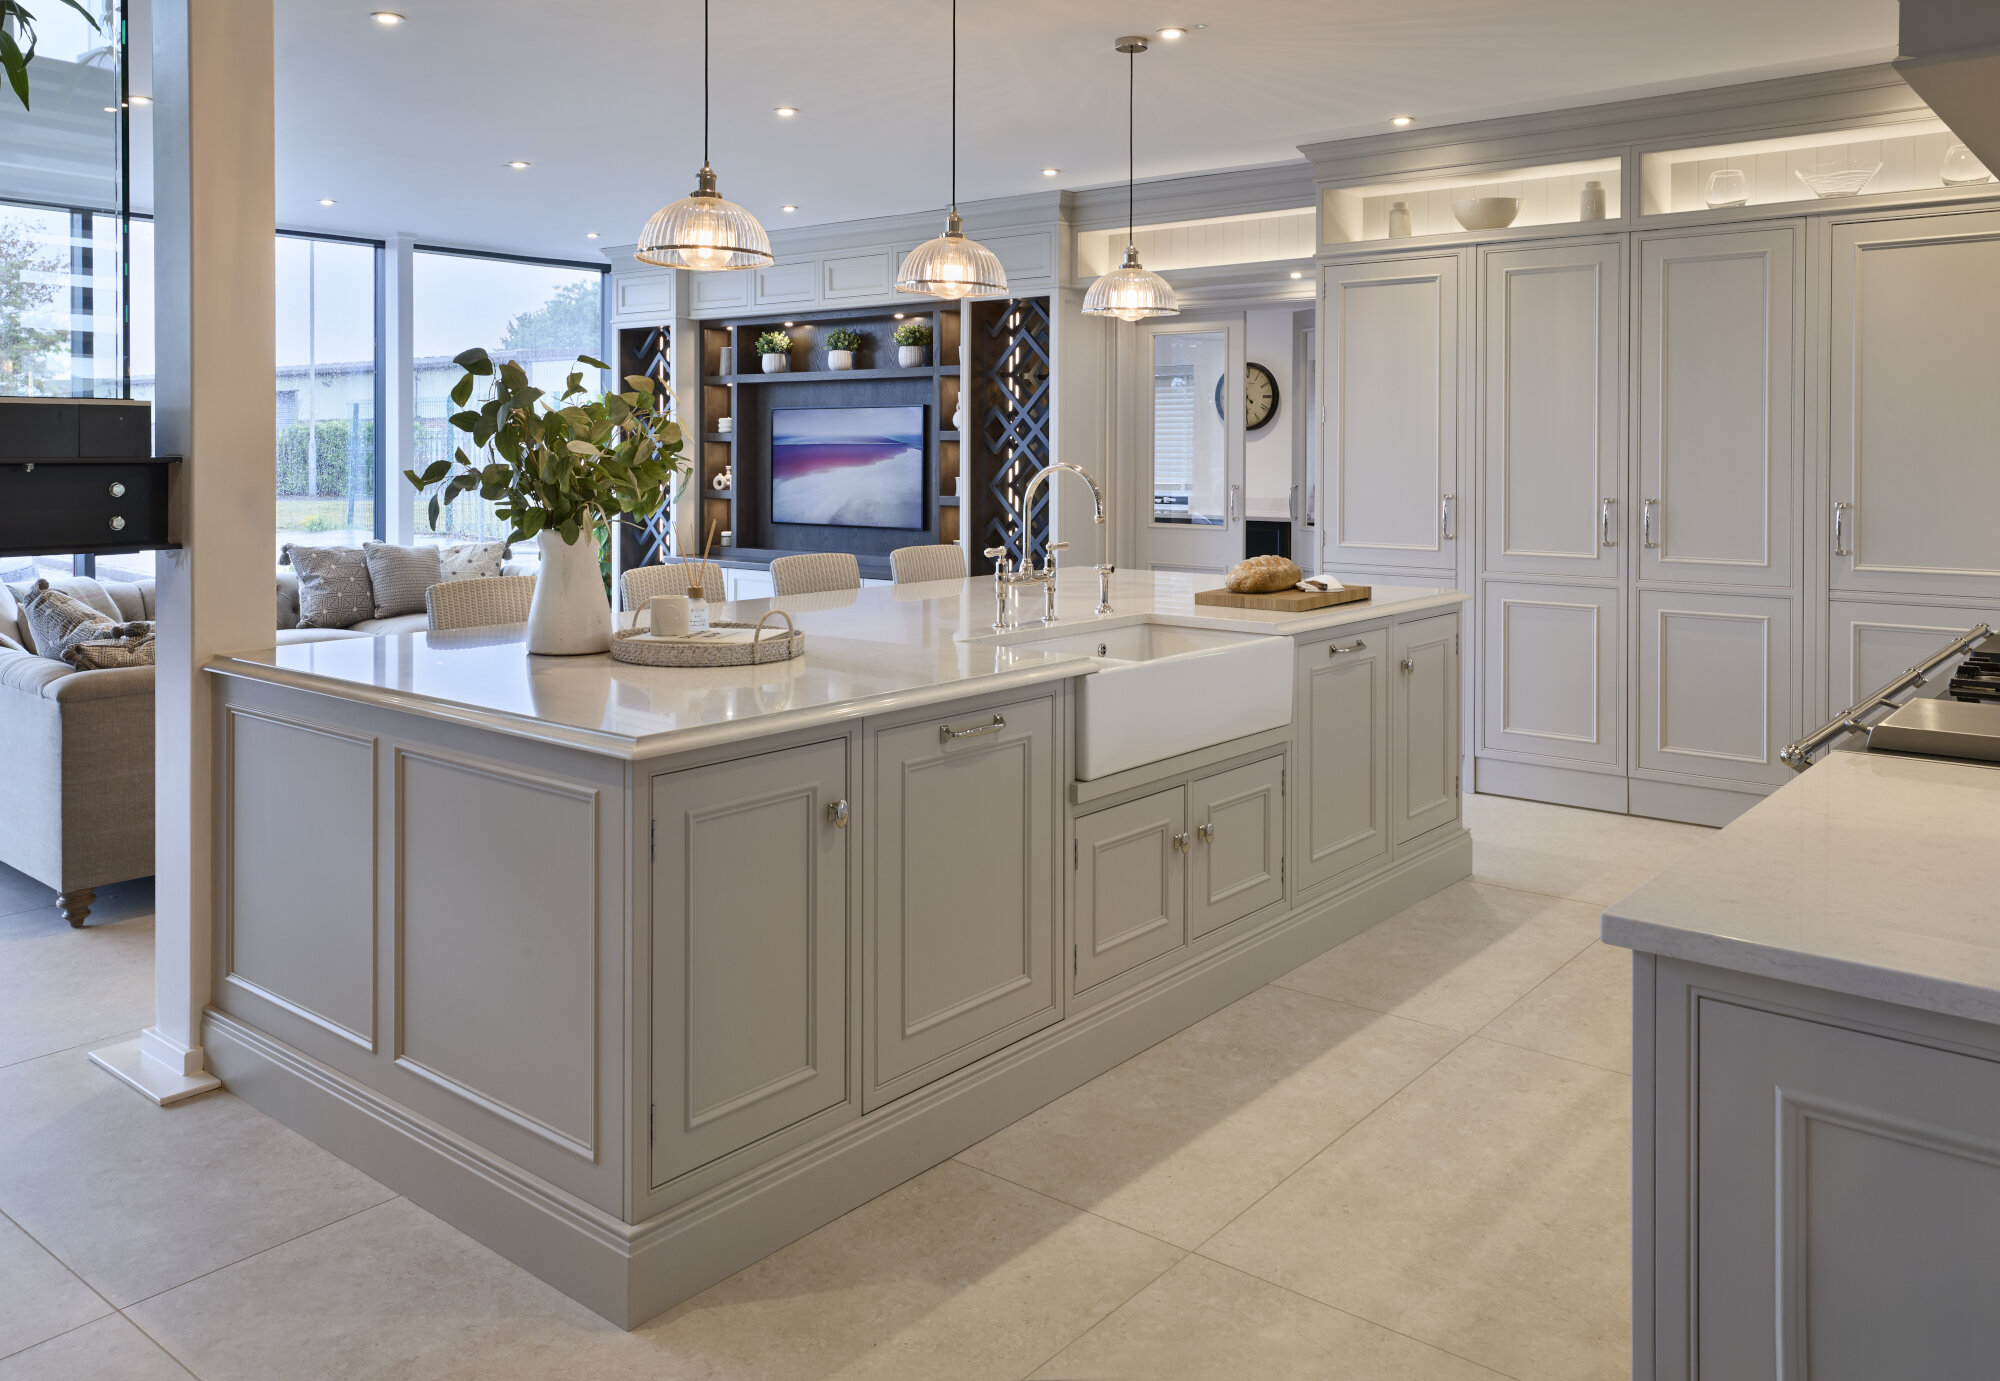 This Bespoke Kitchen Design is on display in our showroom near Market Deeping